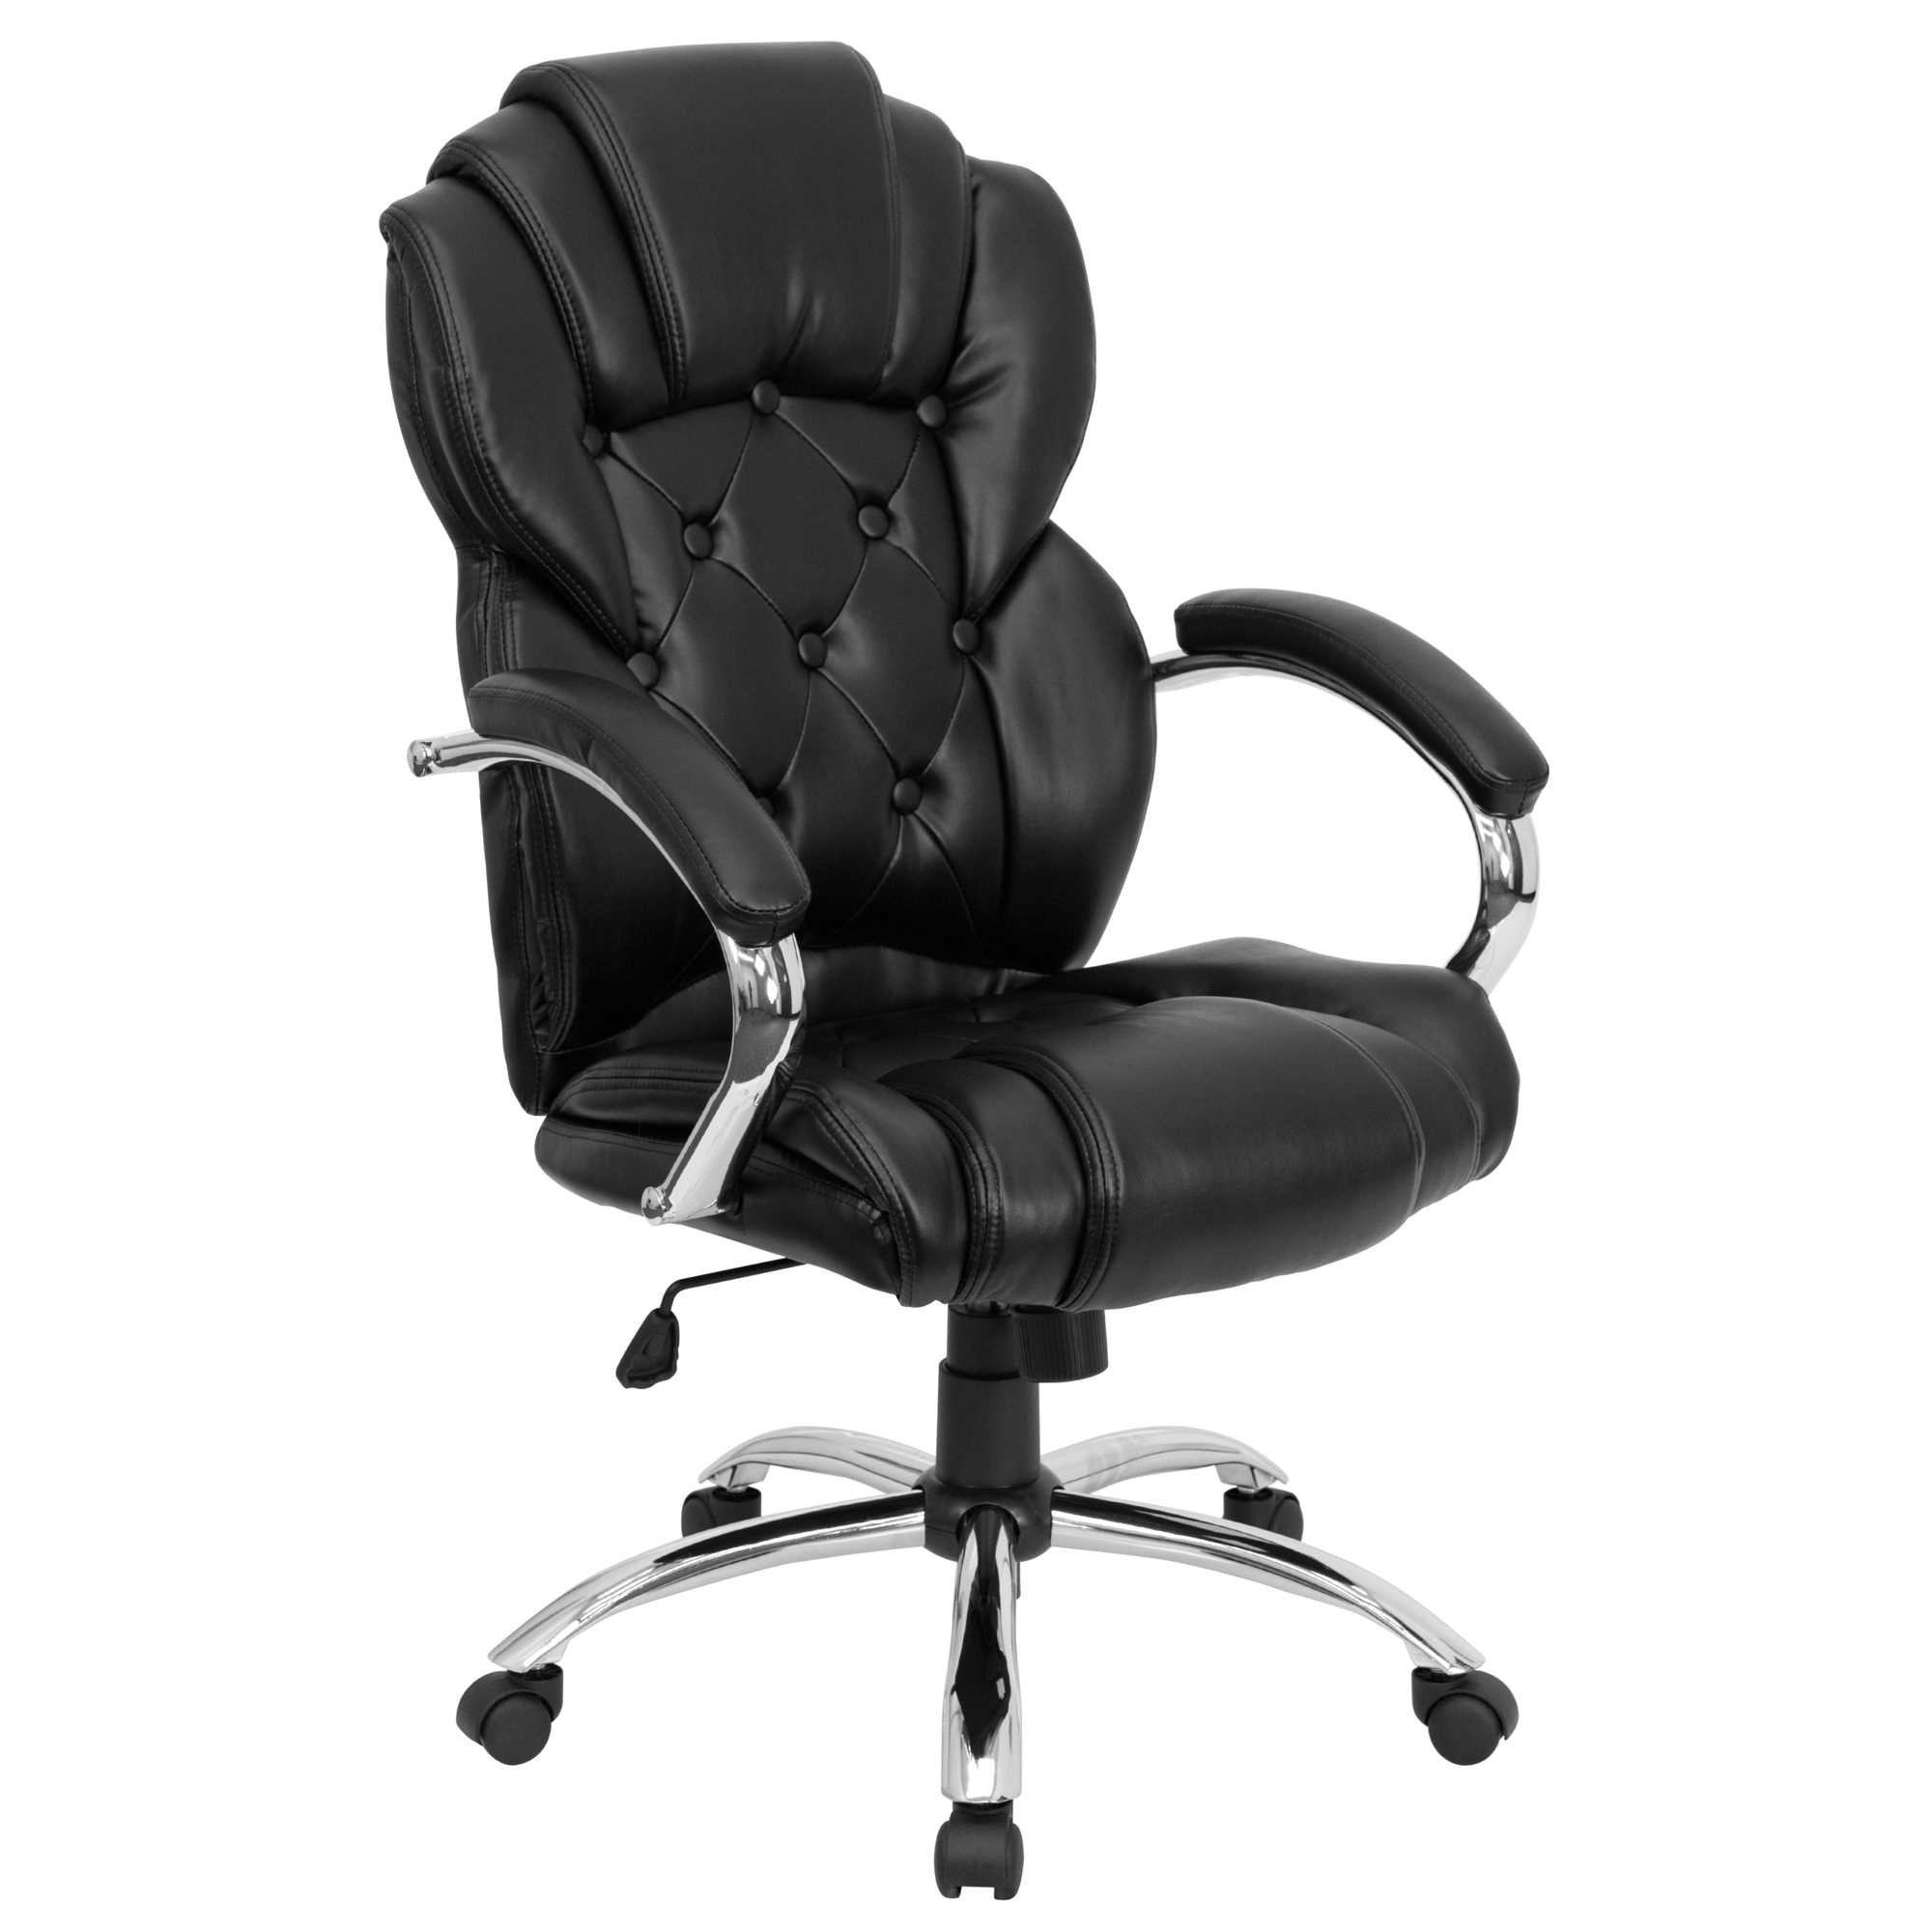 Flash Furniture, High Back Black LeatherSoft Swivel Office Chair, Primary Color Black, Included (qty.) 1, Model GO908ABK